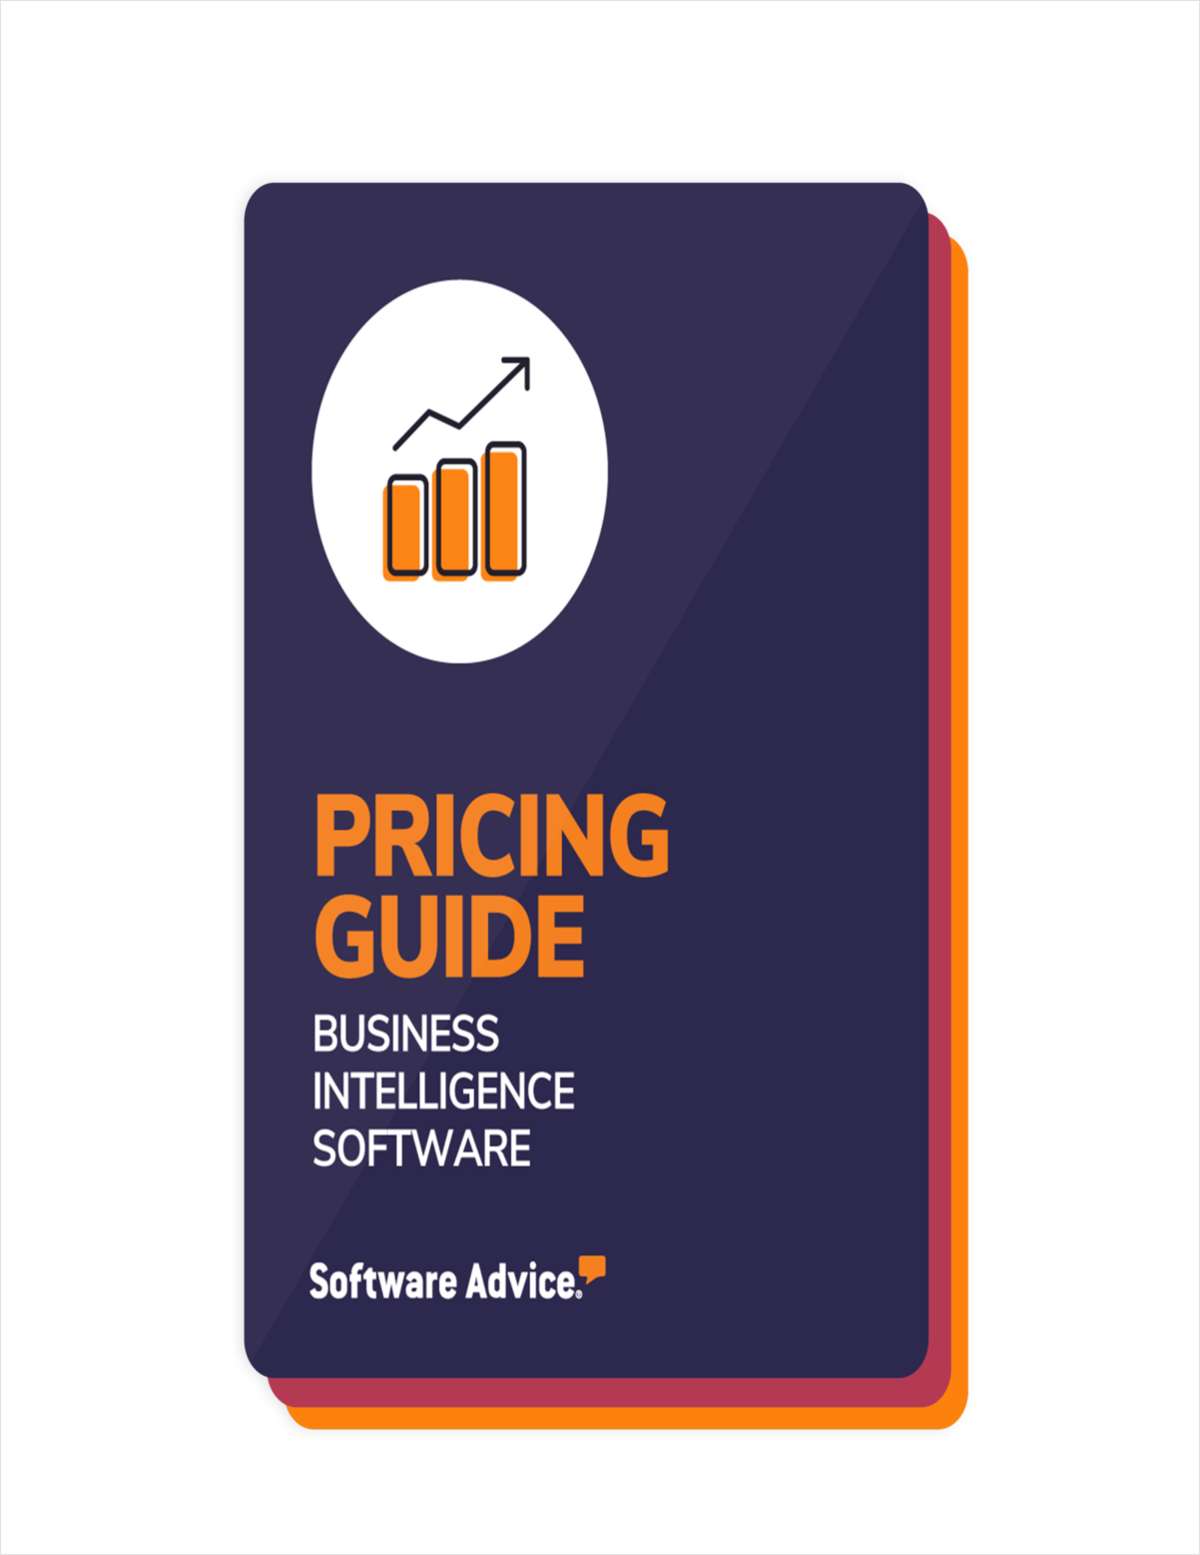 Don't Overpay: What to Know About Business Intelligence Software Prices in 2022